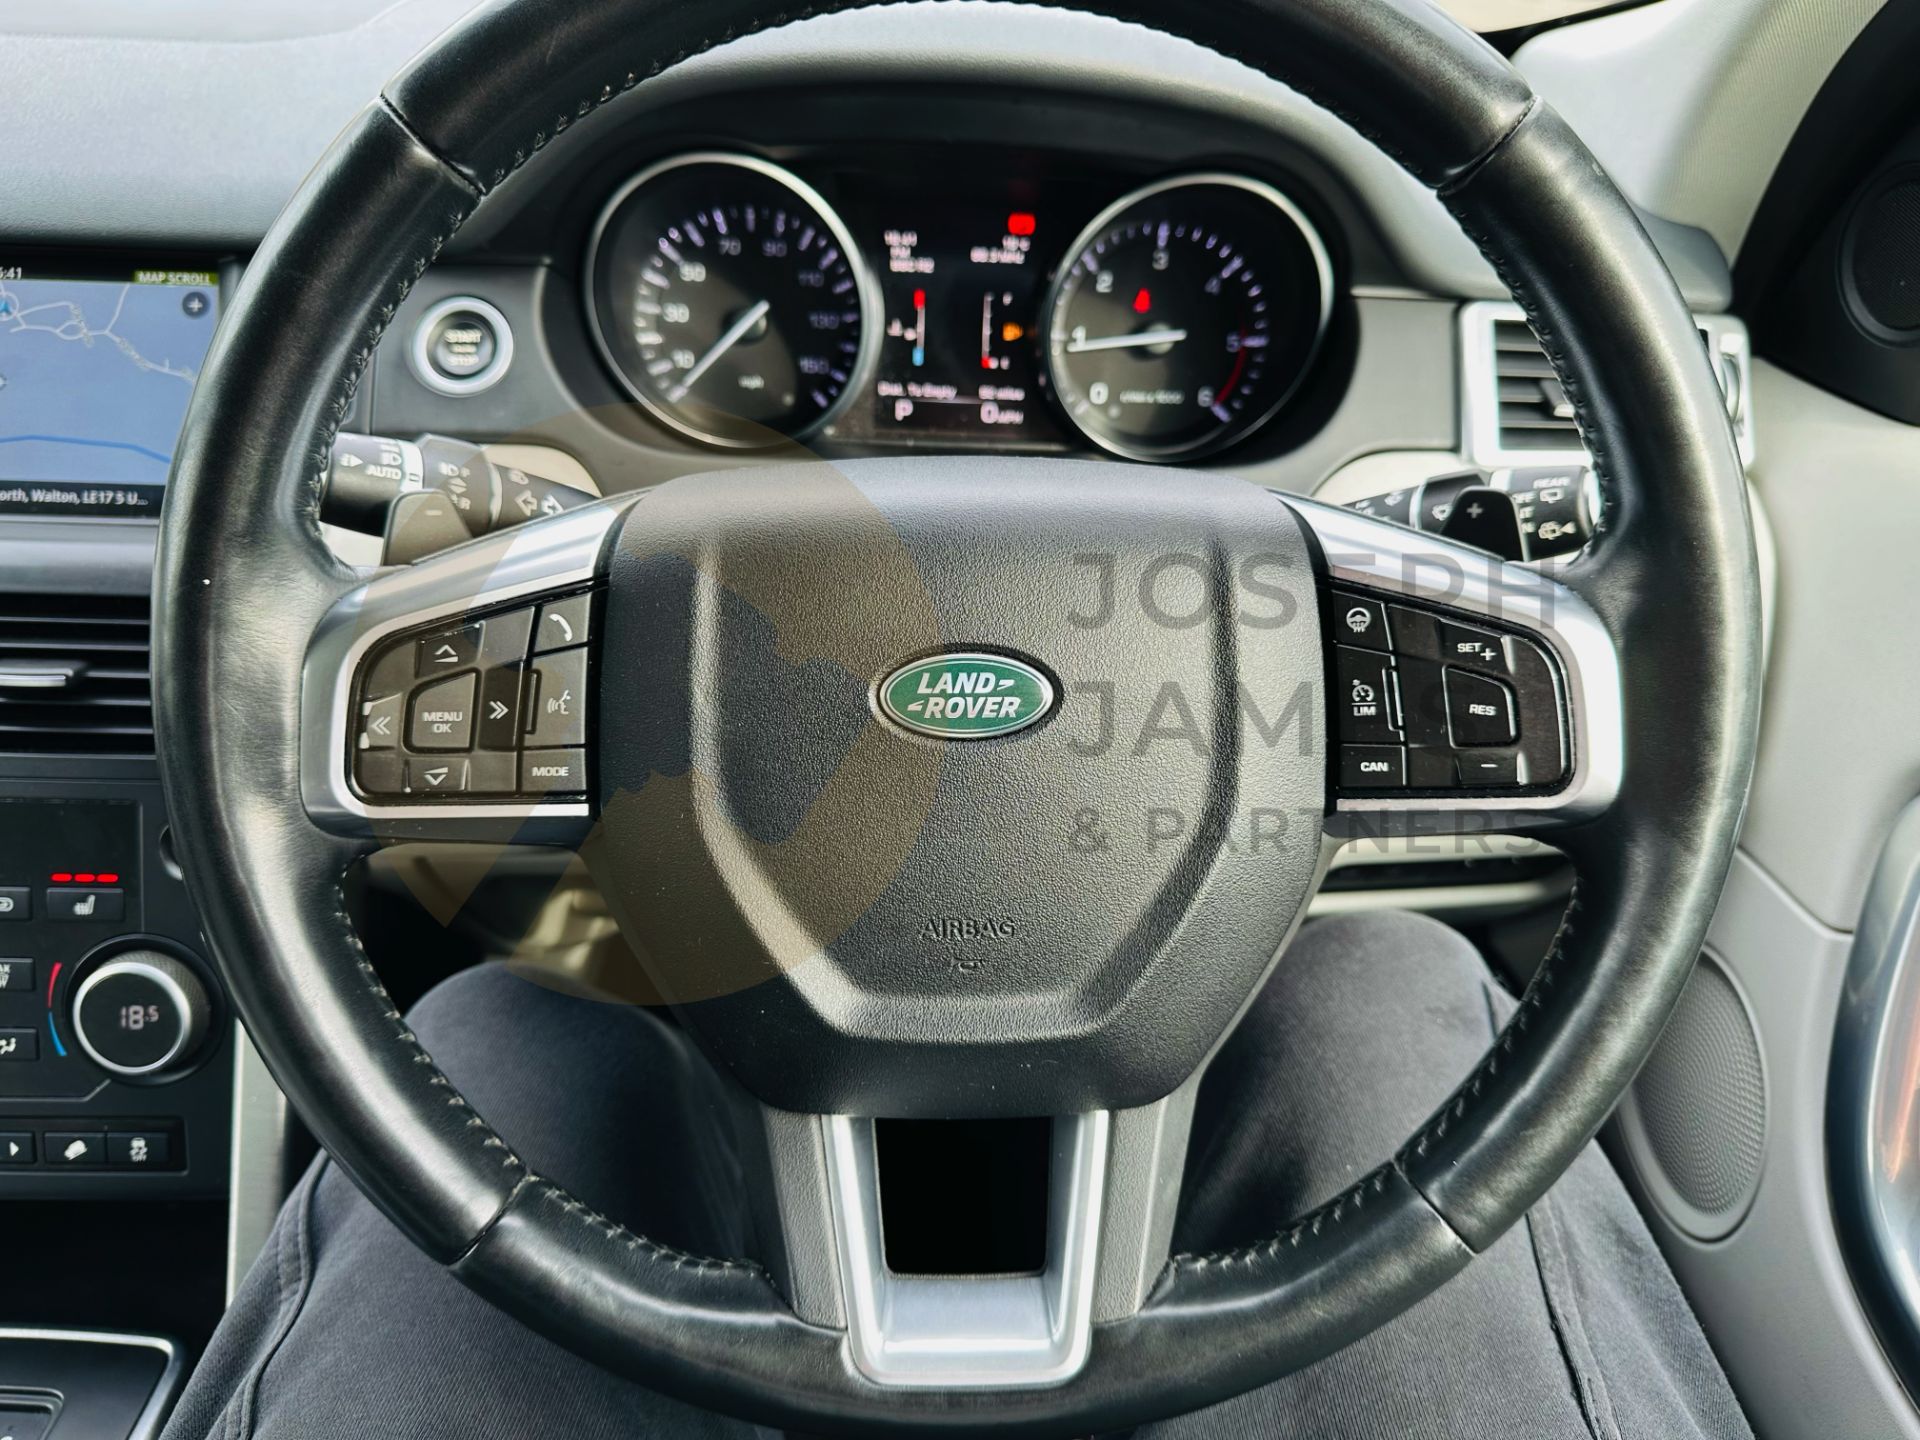 (On Sale) LAND ROVER DISCOVERY SPORT *SE TECH* 7 SEATER SUV (2016 - EURO 6) 2.0 TD4 - AUTO *NO VAT* - Image 38 of 41